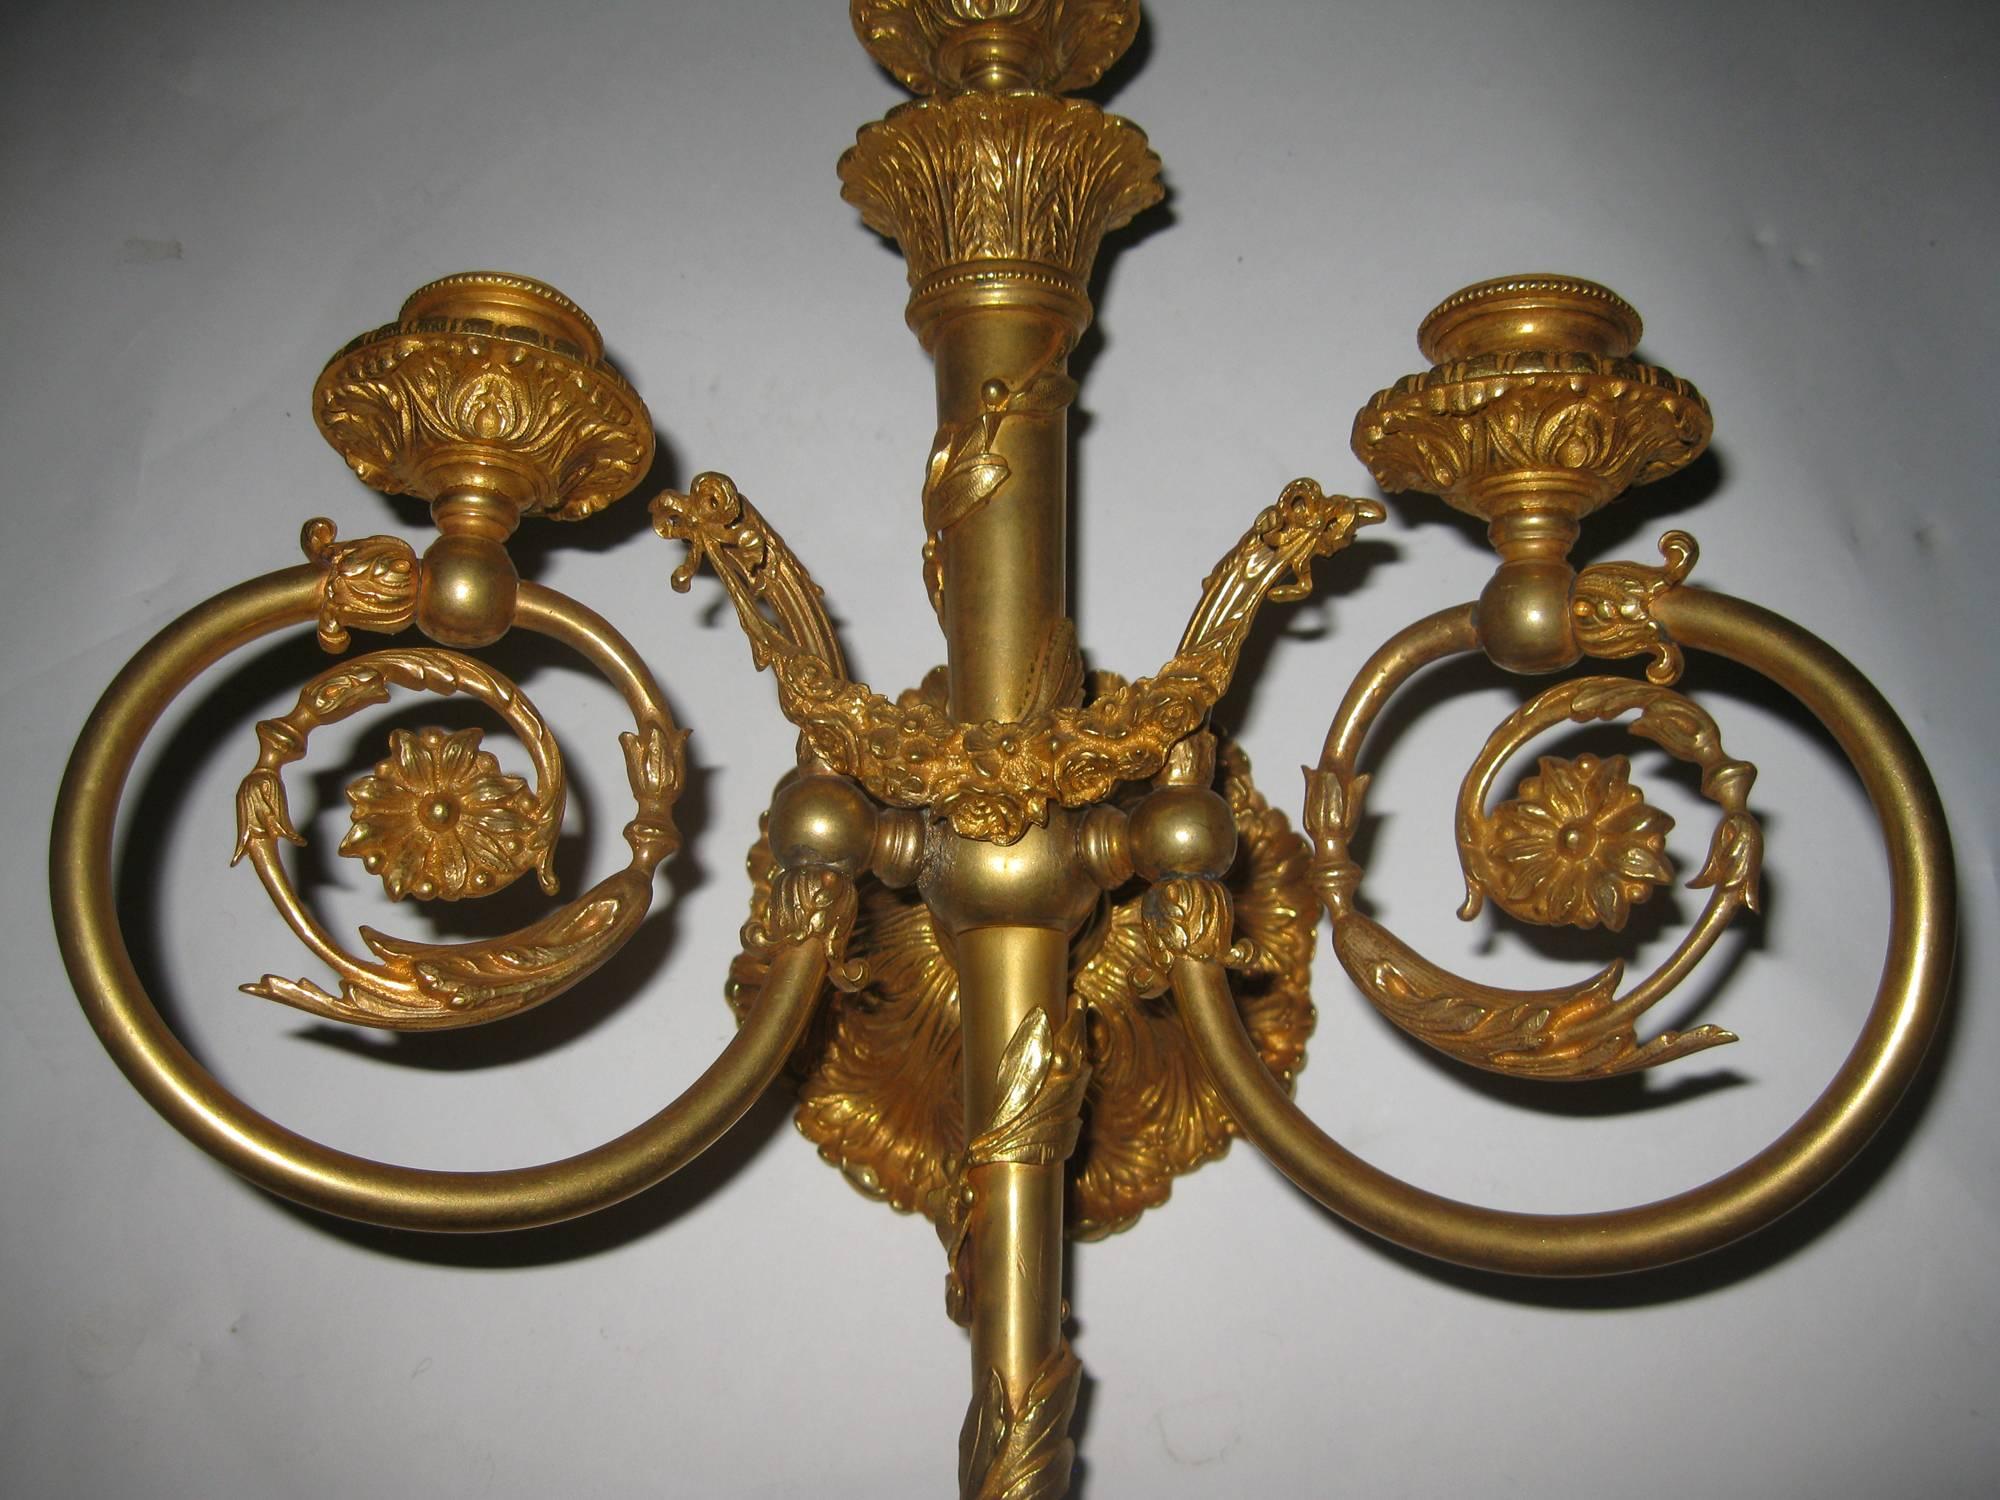 Pair of bronze doré wall sconces featuring incredible detailed ormolu including festooned floral garlands, ribbons and tiny bow embellishments. Triple candle holders. Drilled for wiring. See measurements below.